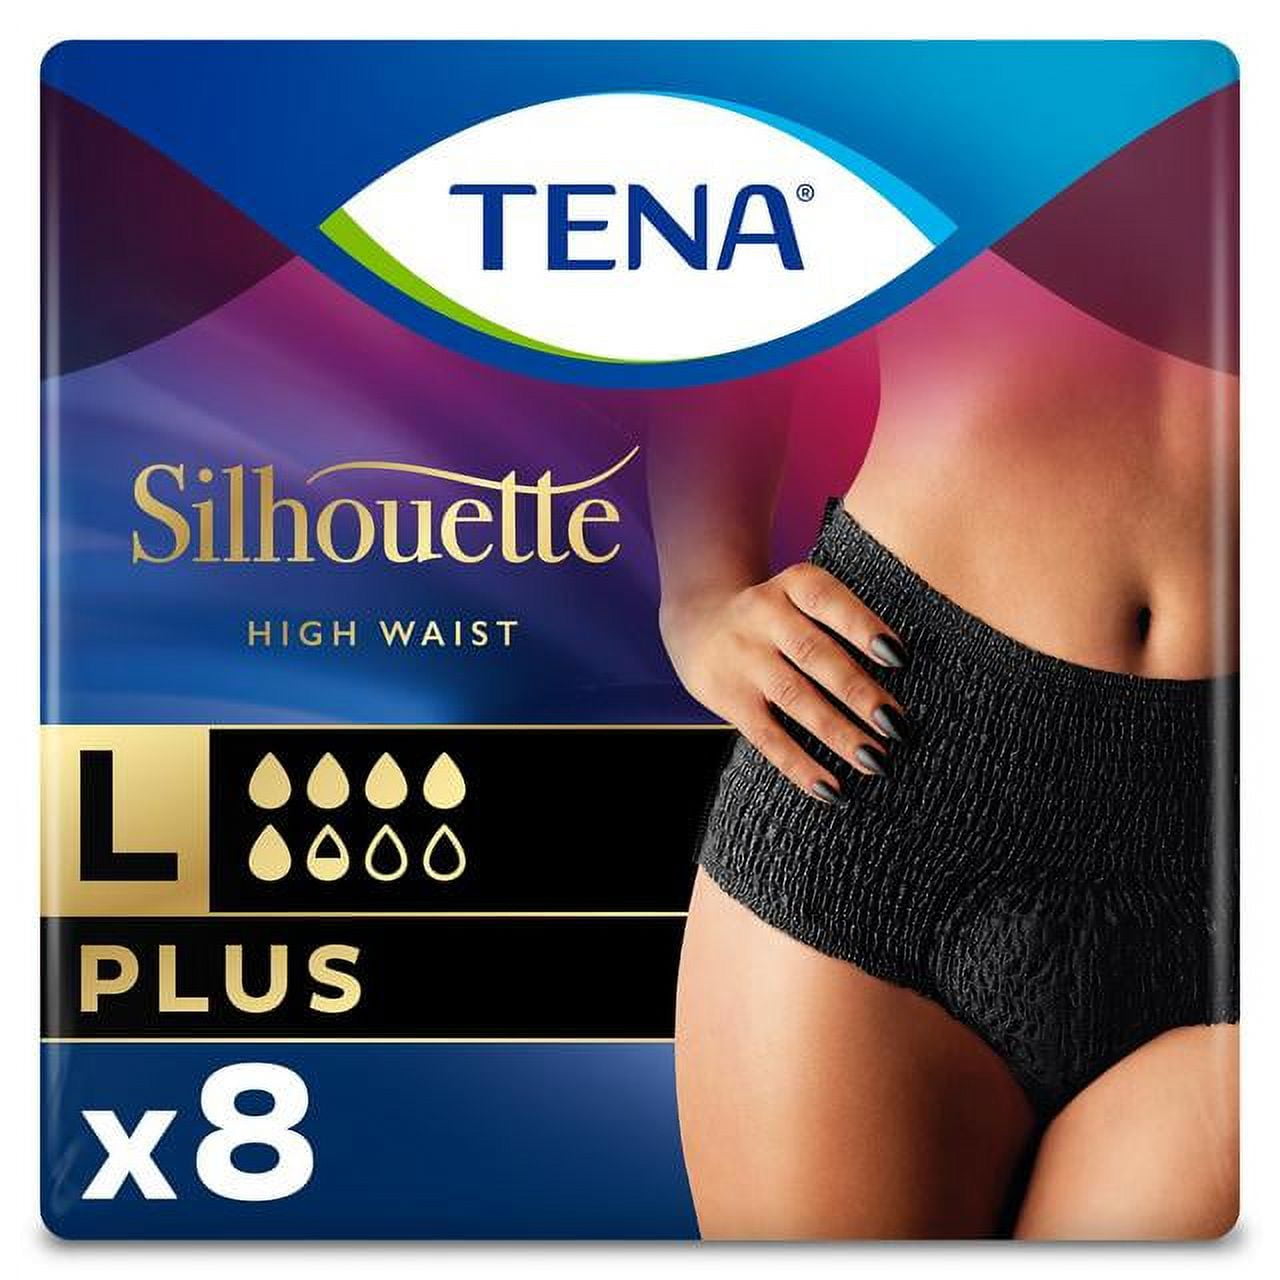 TENA Lady Silhouette Plus Noir Incontinence Pants Large 8 per pack -  European Version NOT North American Variety - Imported from United Kingdom  by Sentogo - SOLD AS A 2 PACK 